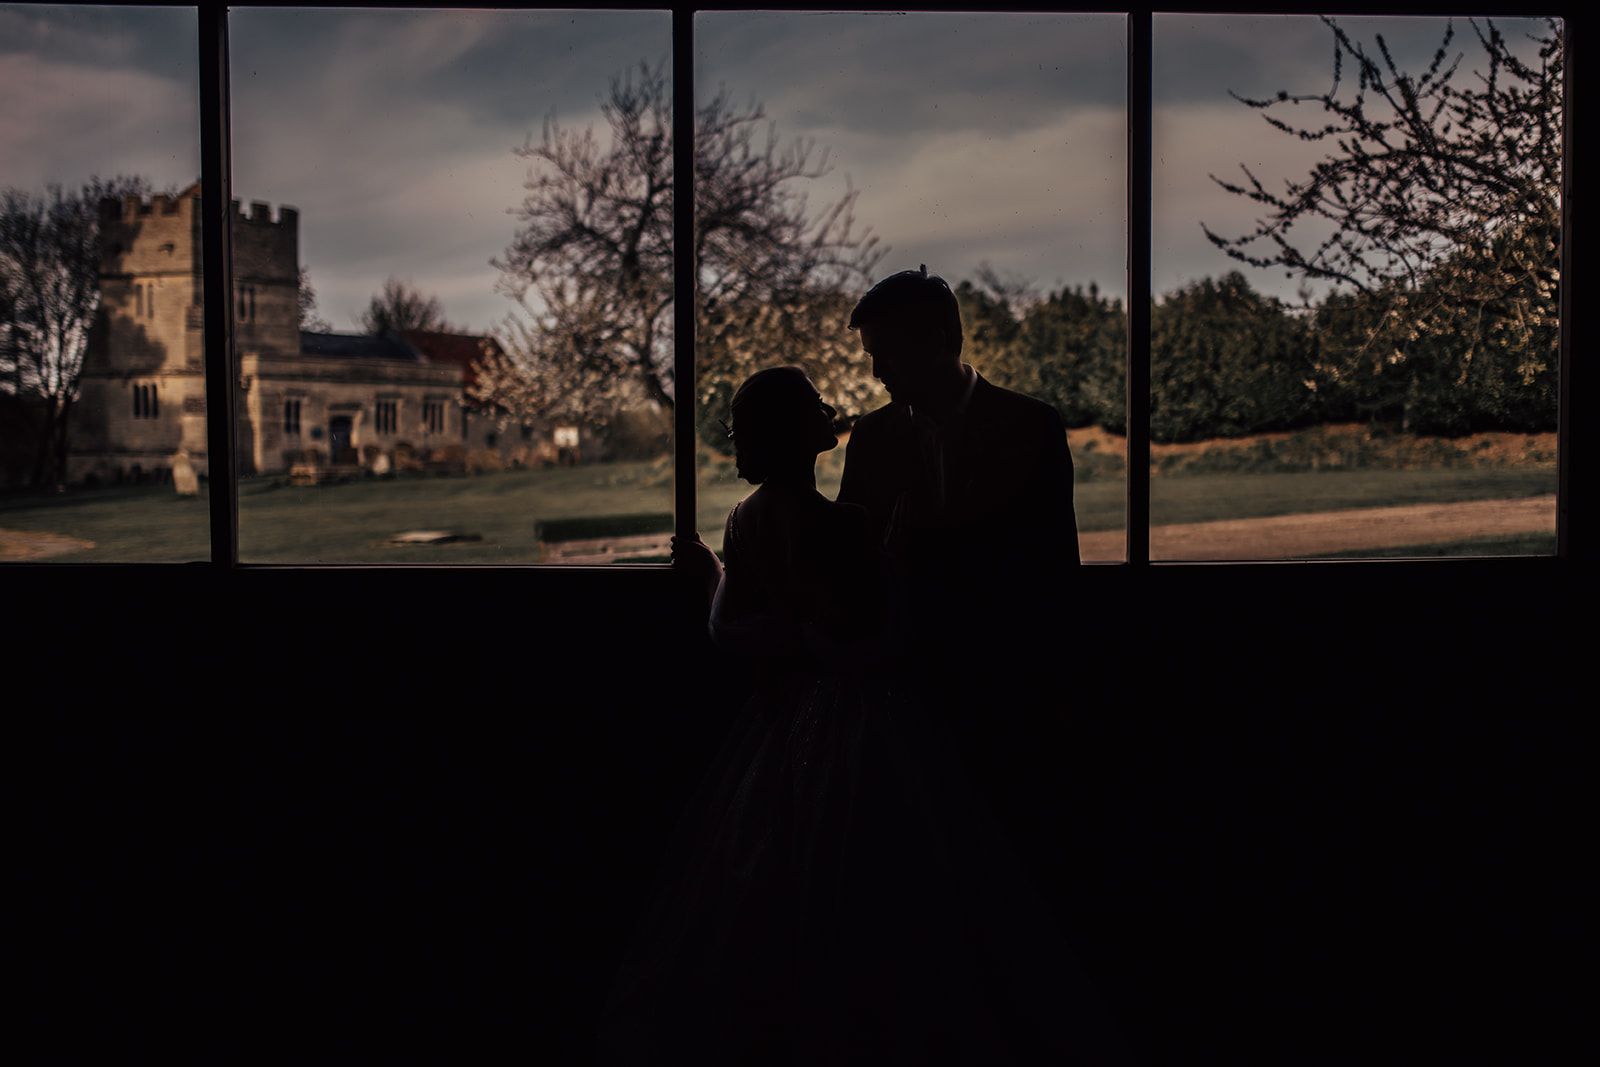 Gorgeous silhouette image of newlyweds from inside the barn with the trees and chapel in the grounds of Furtho Manor Farm in the background. Photo thanks to Francesca Checkley Photography.